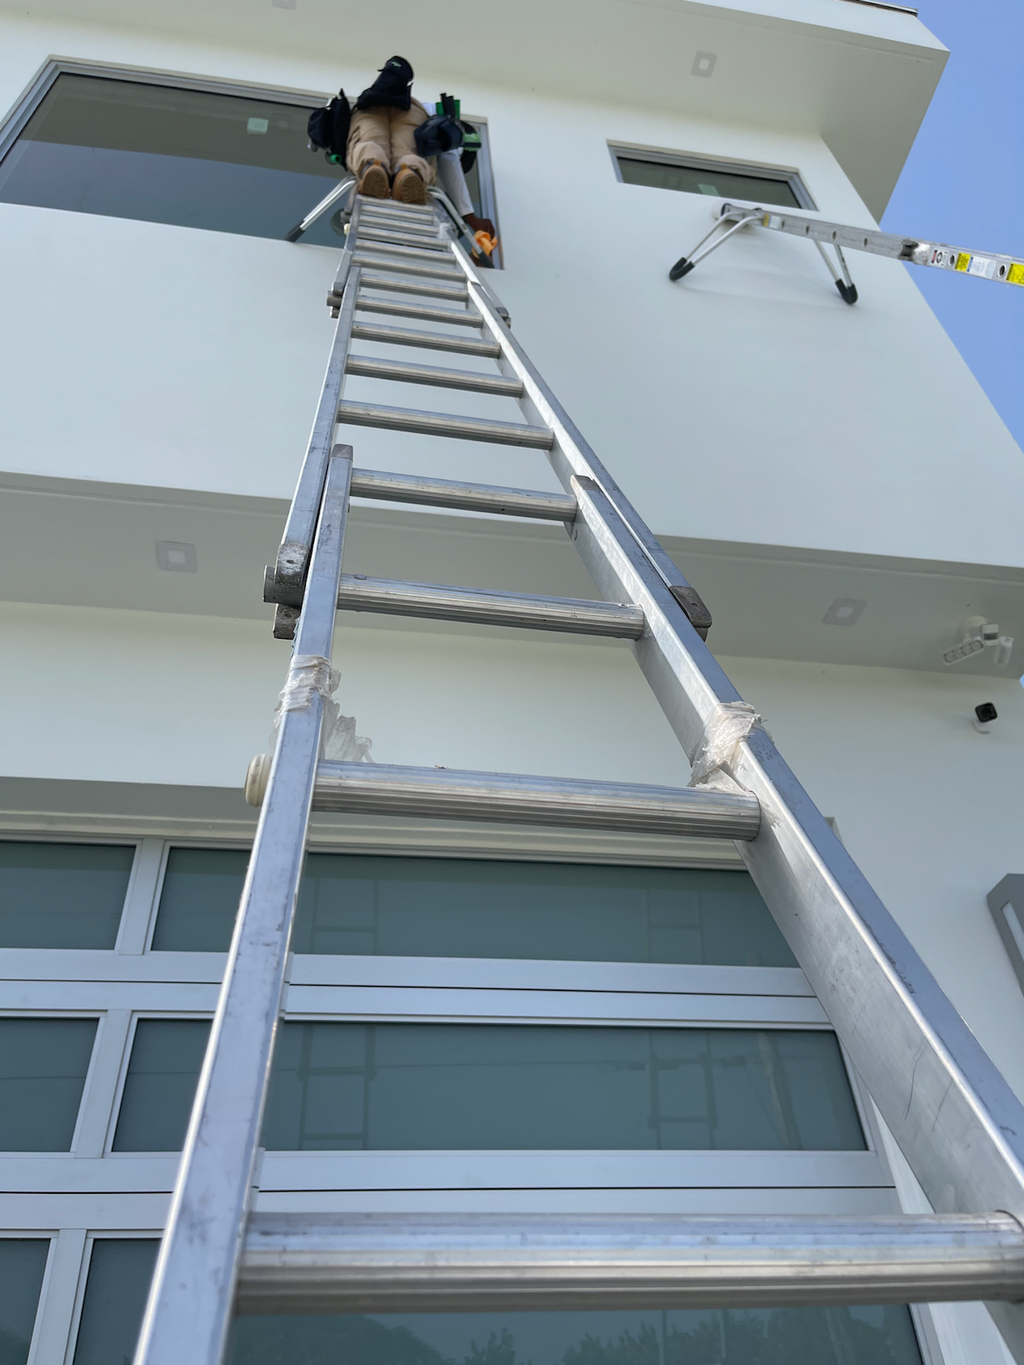 Window Cleaning Ladders For Sale